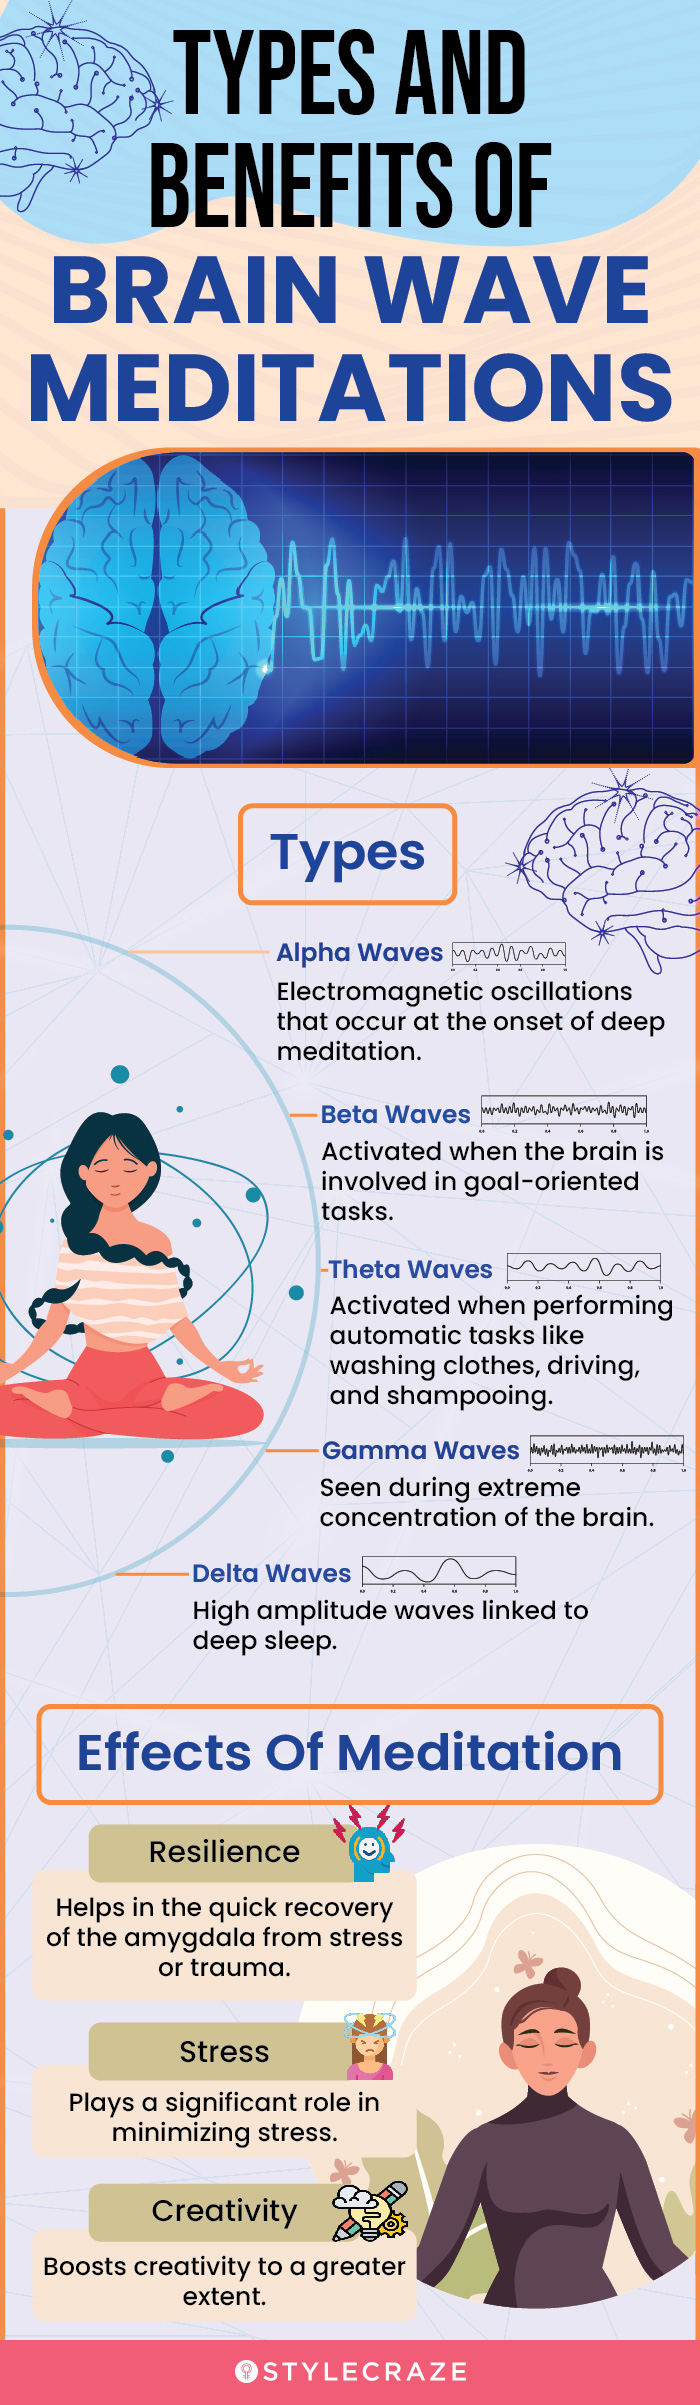 types and benefits of brain wave meditations (infographic) width=